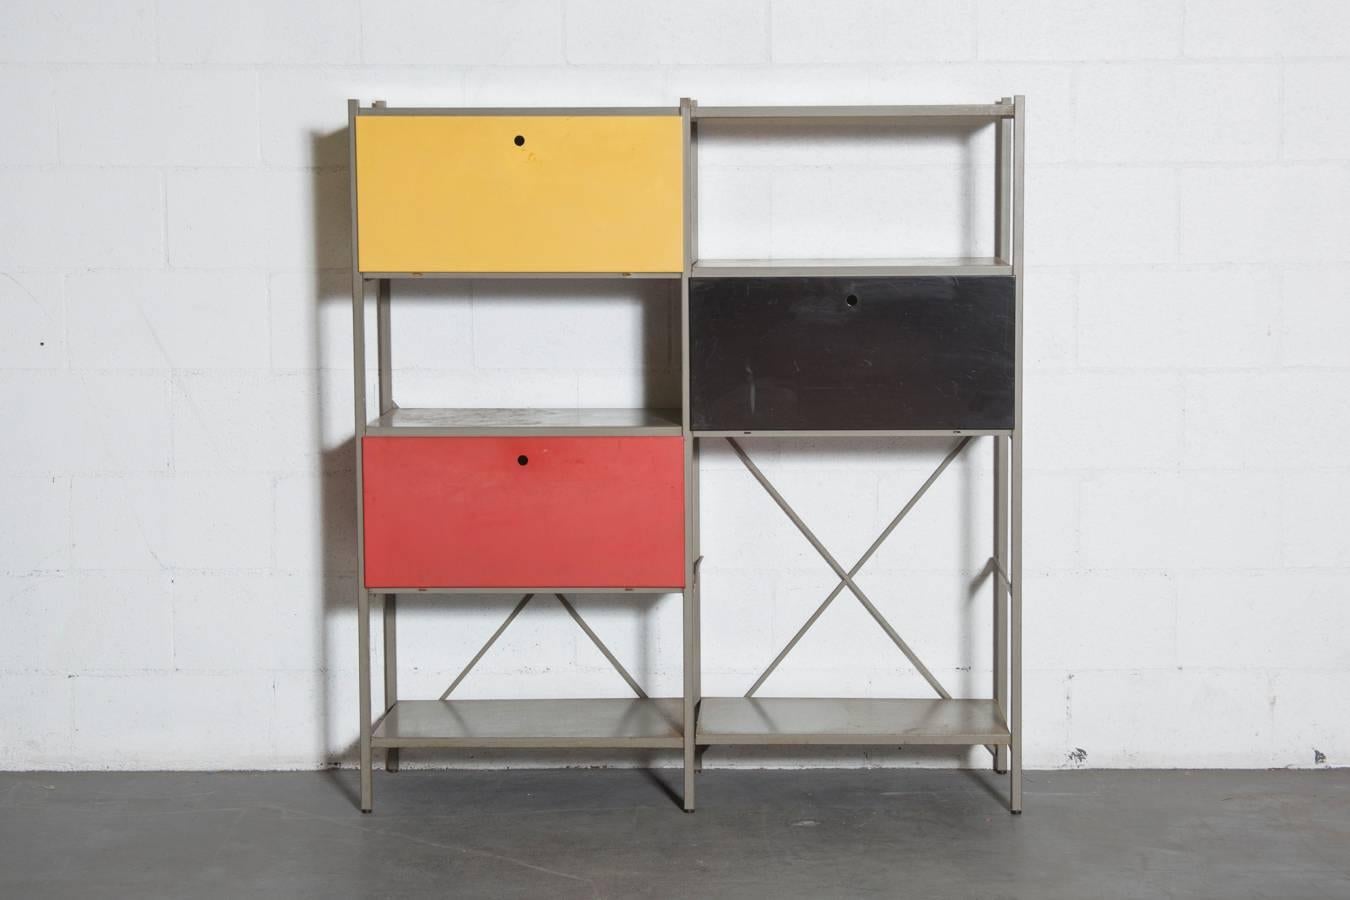 Colorful Industrial Two-Section Metal Storage Cabinet by Wim Rietveld for Gispen,1954. This design received the 